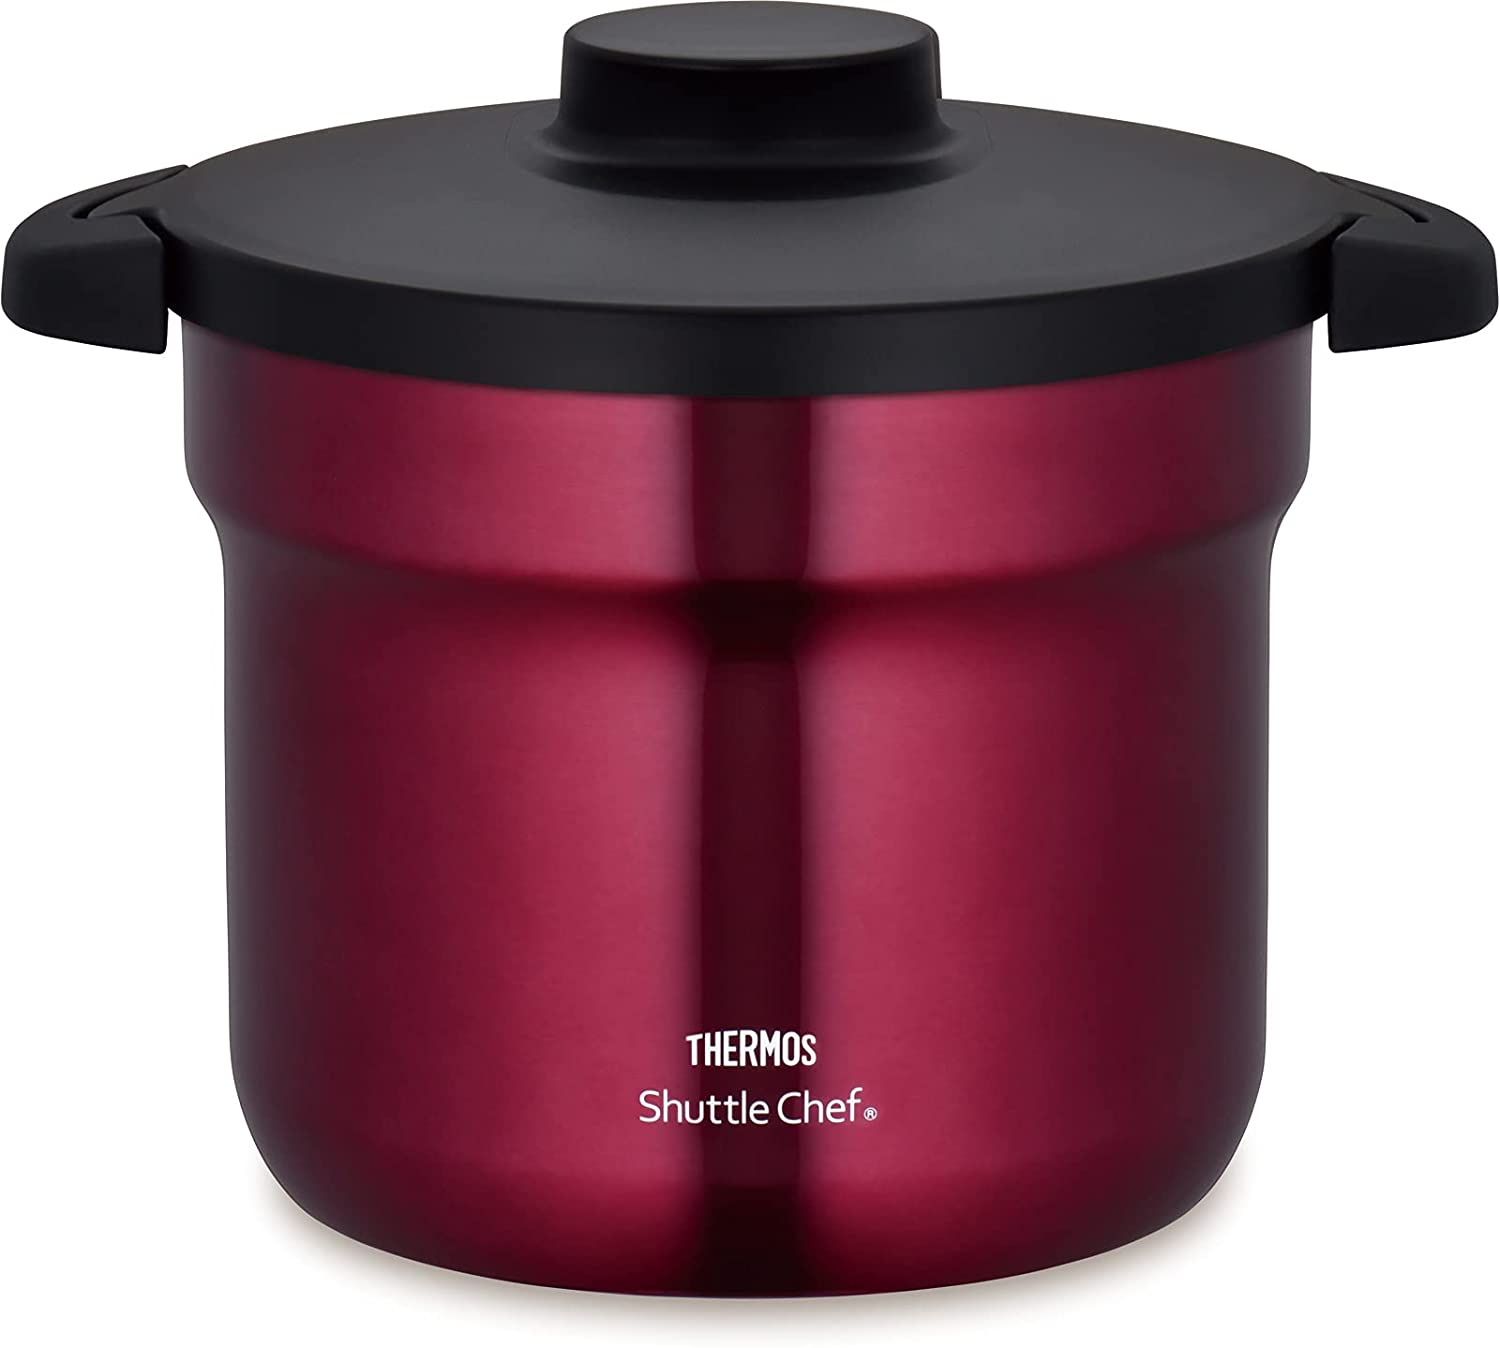 [In stock｜Free Shipping] Thermos - Shuttle Chef IH 4.3L Vacuum Cooker｜For 4-6 people｜New color in 2021｜KBJ4501